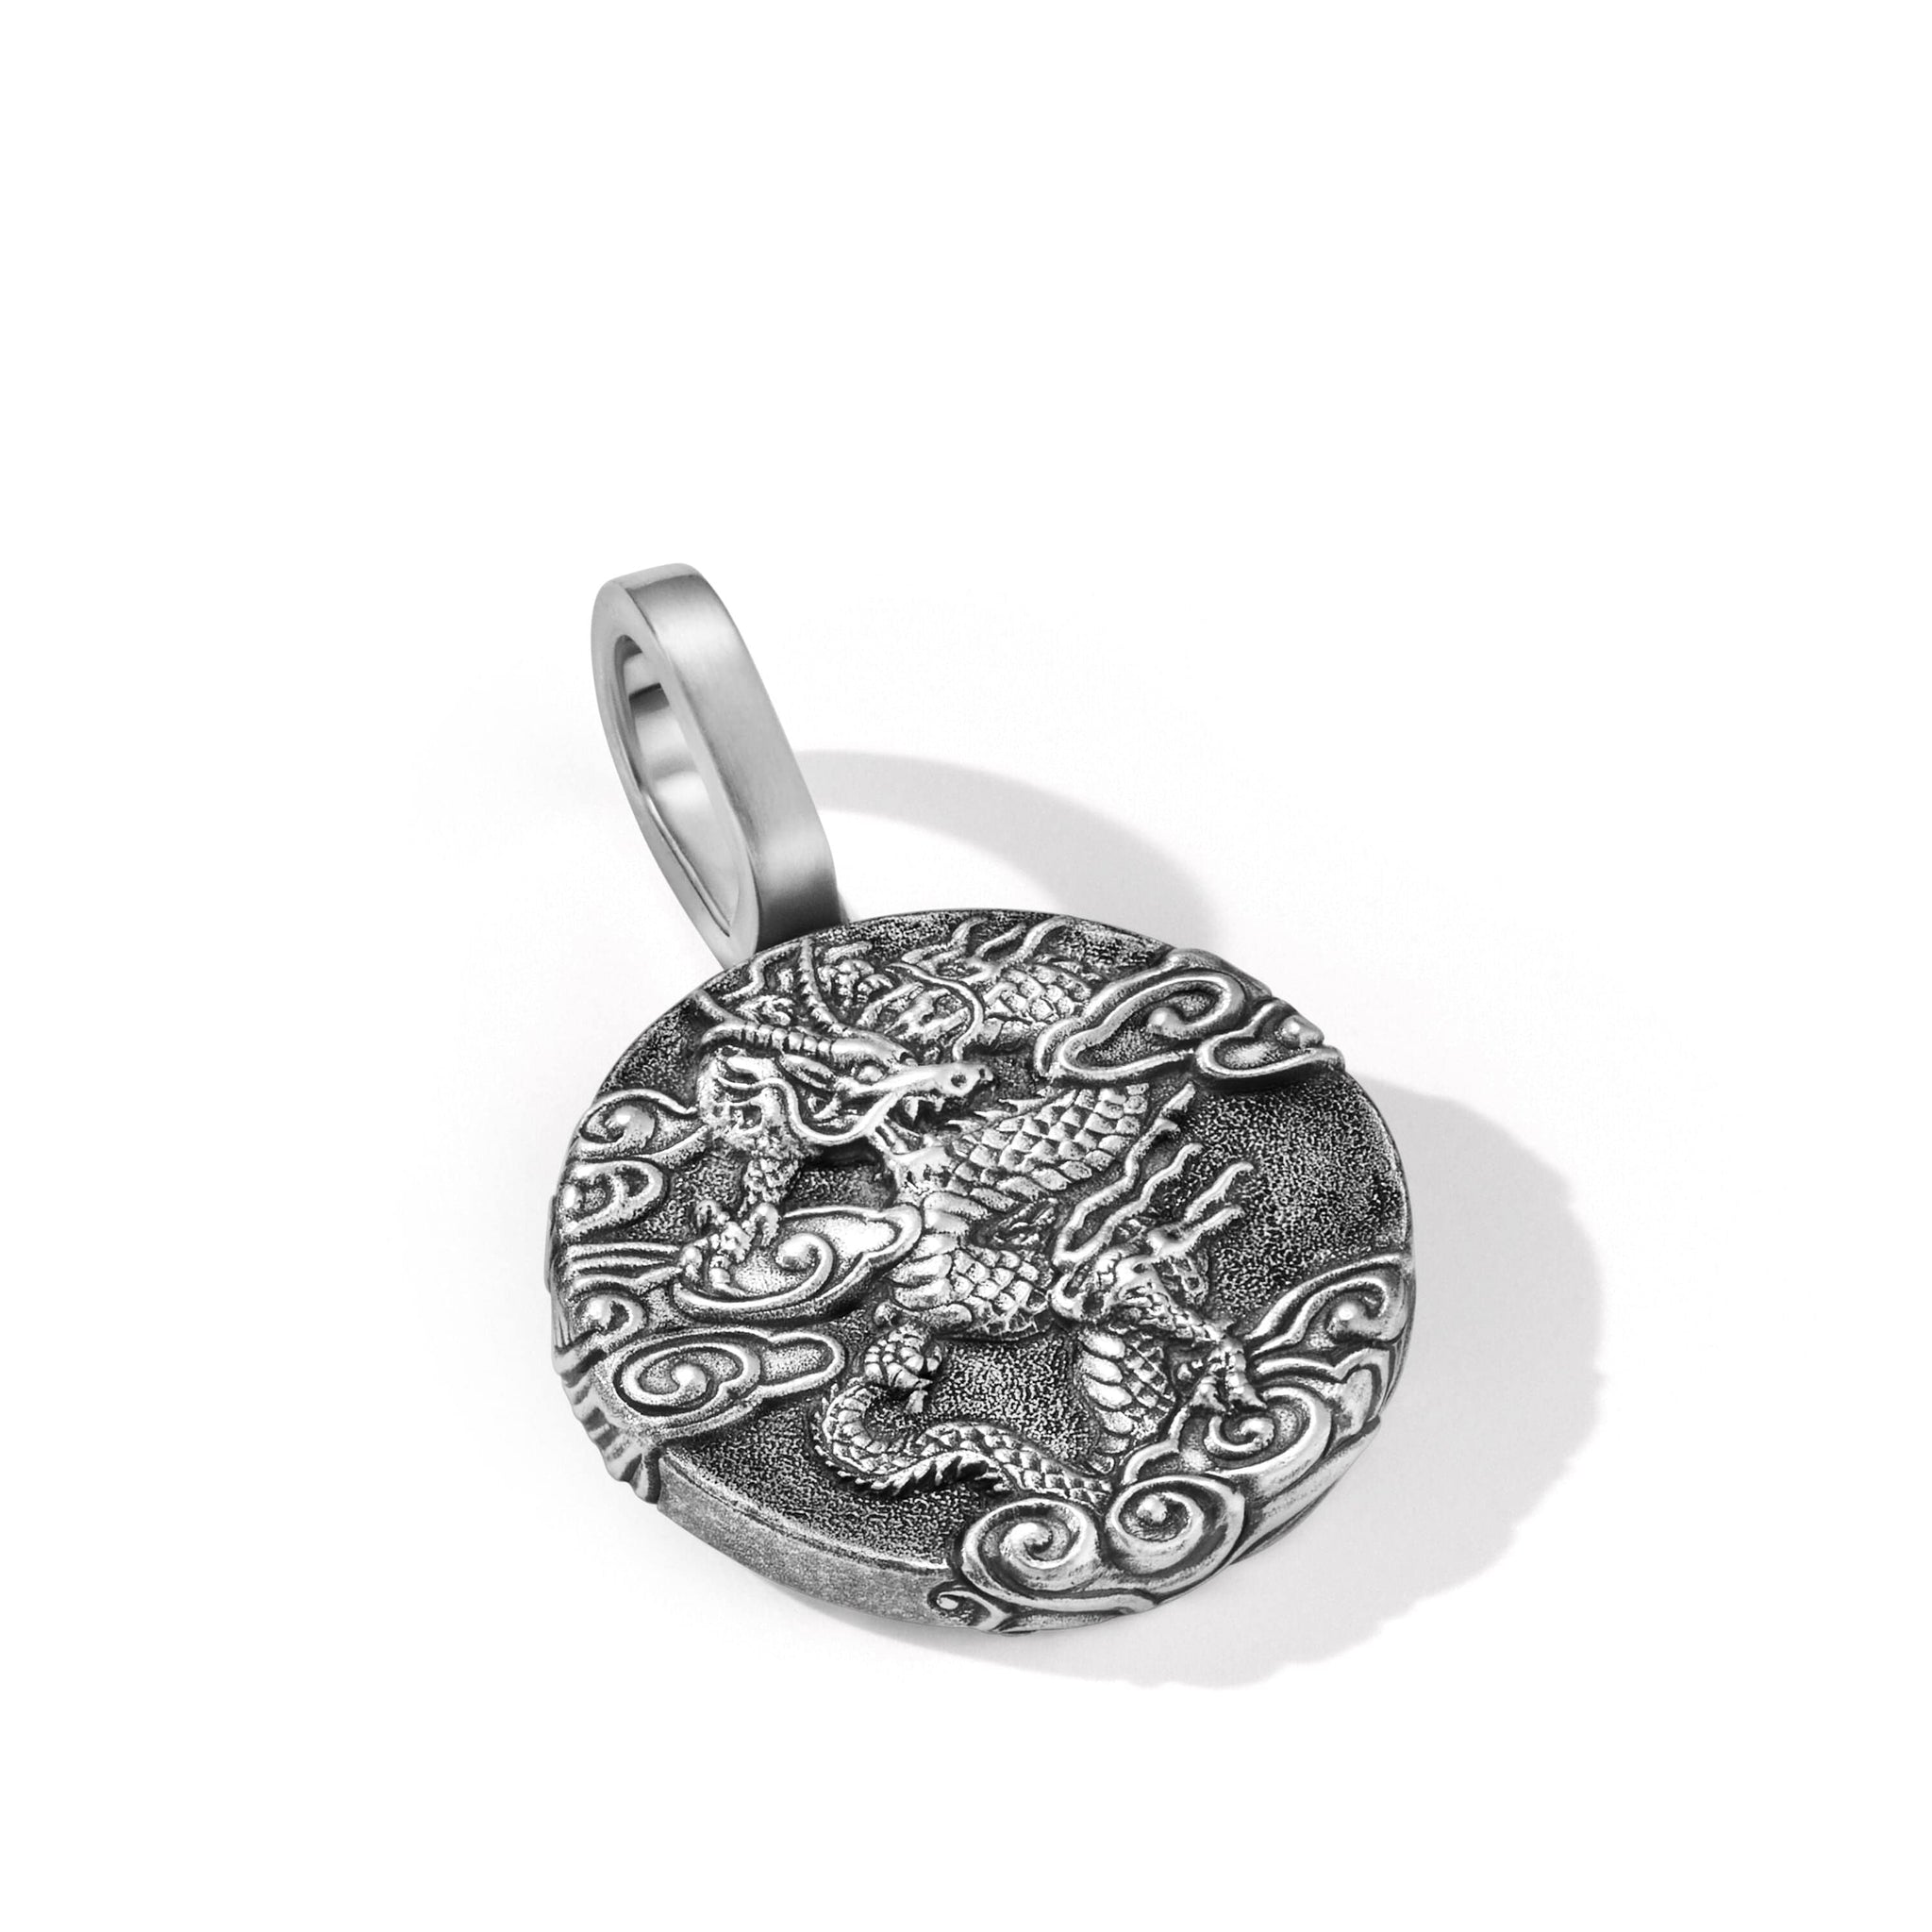 Dragon Amulet in Sterling Silver